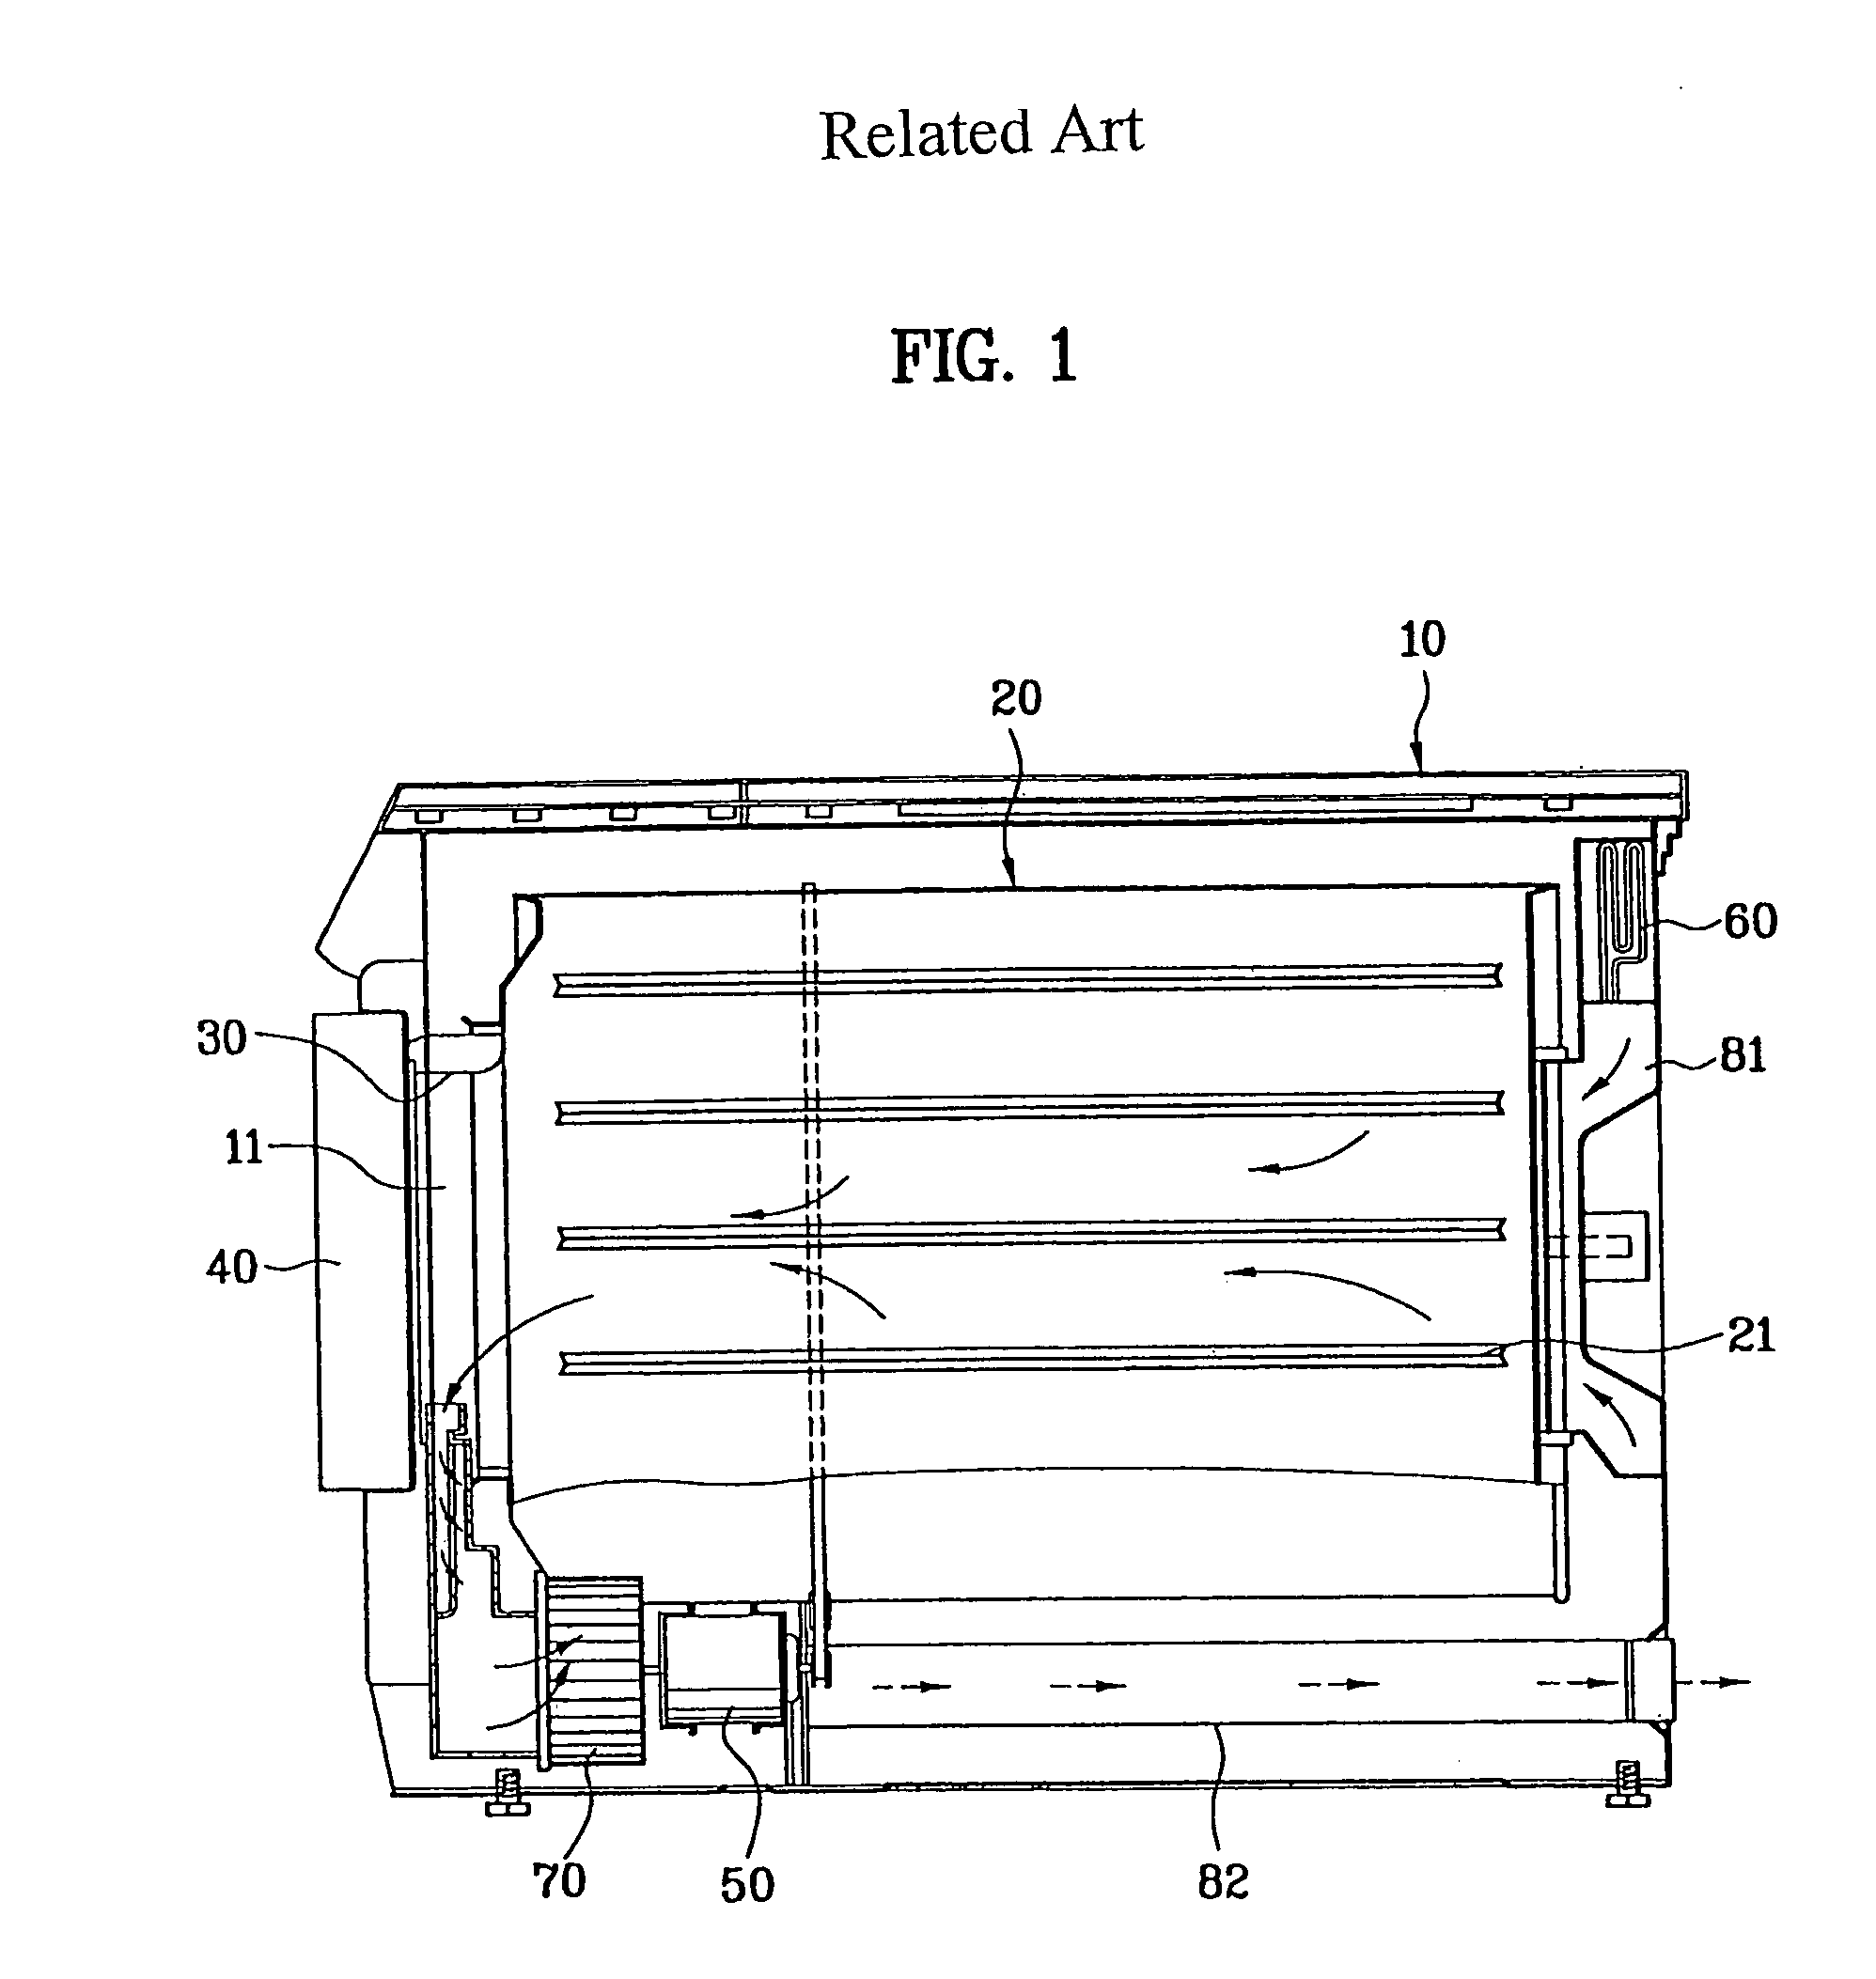 Operation method and device for combination dryer